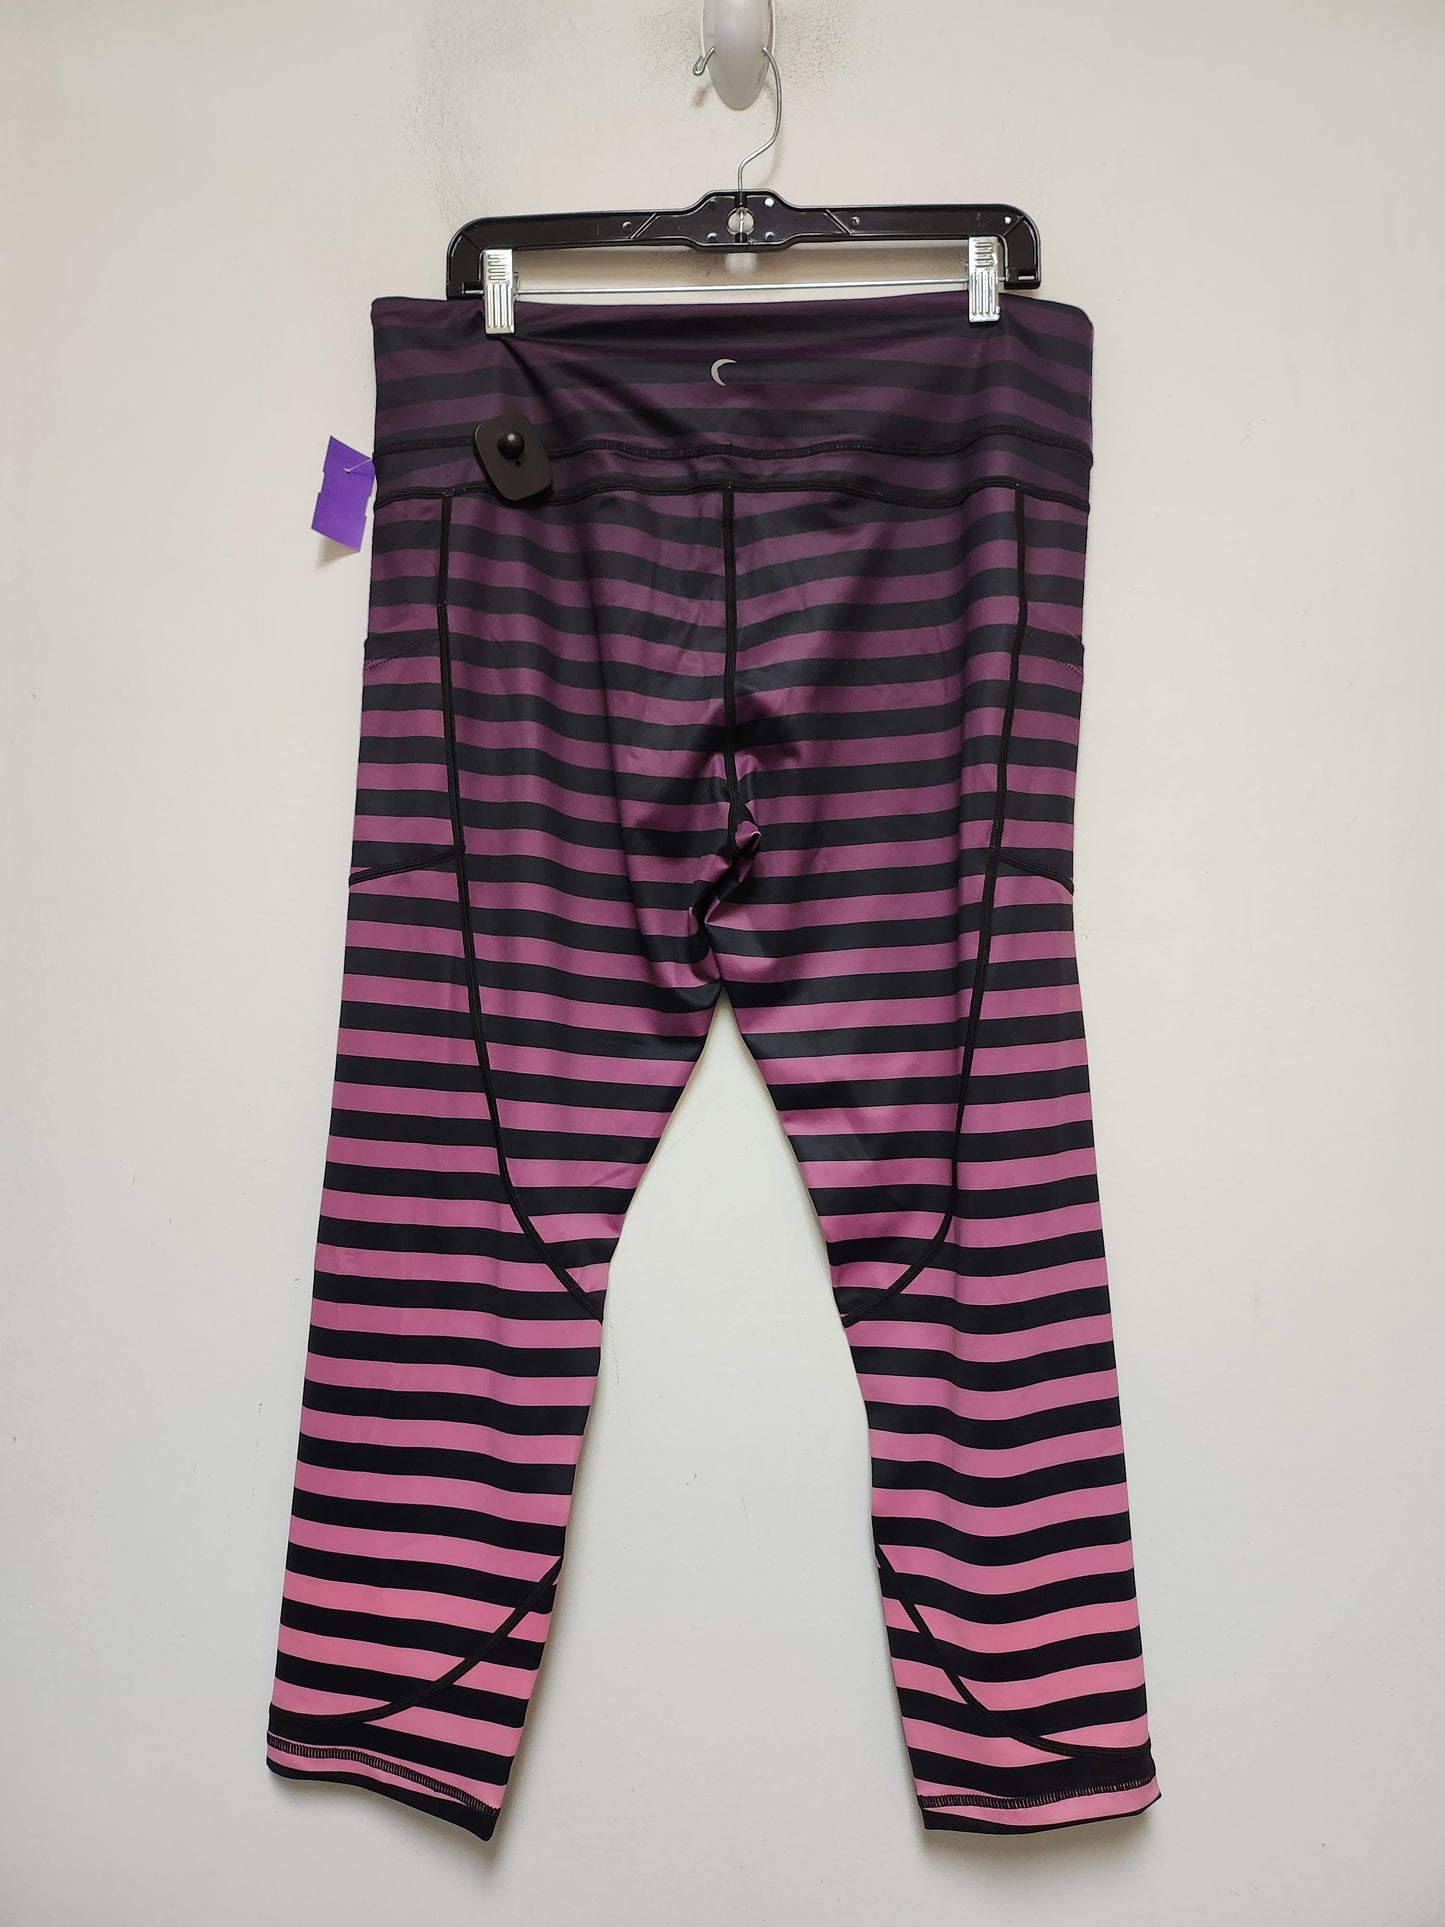 Striped Pattern Athletic Leggings Zyia, Size 2x